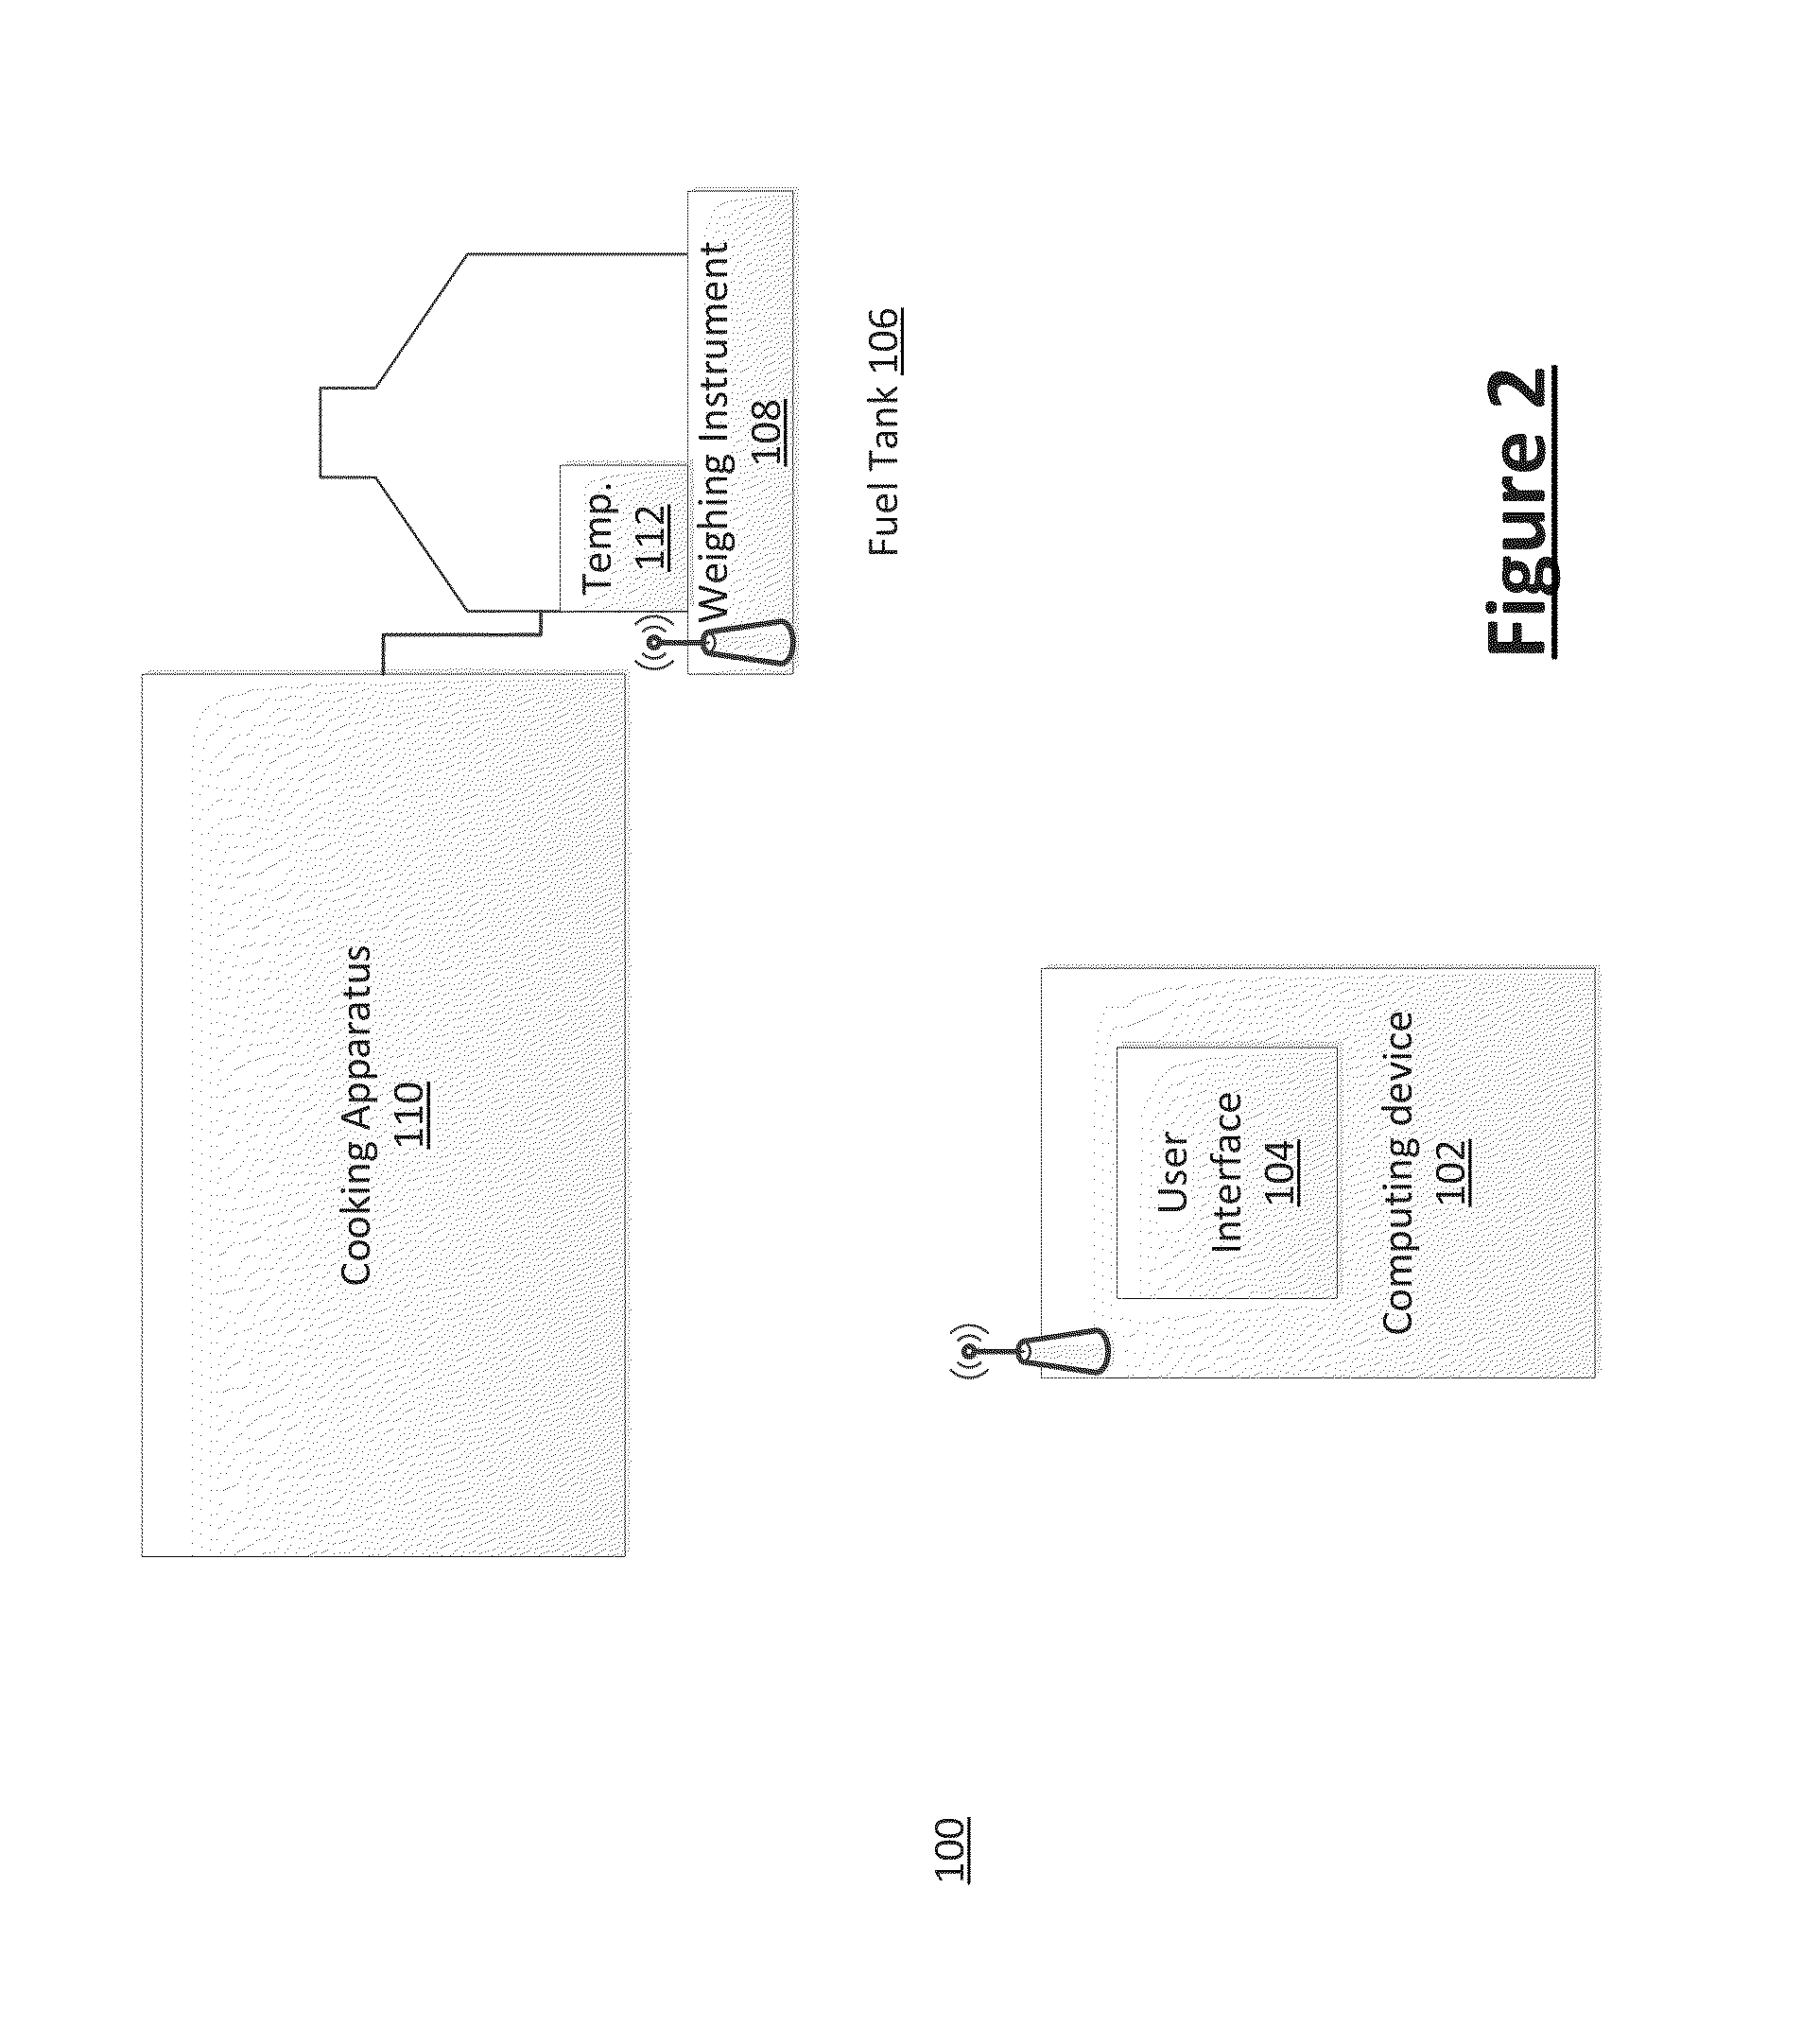 Systems, methods and devices for remote fuel level detection